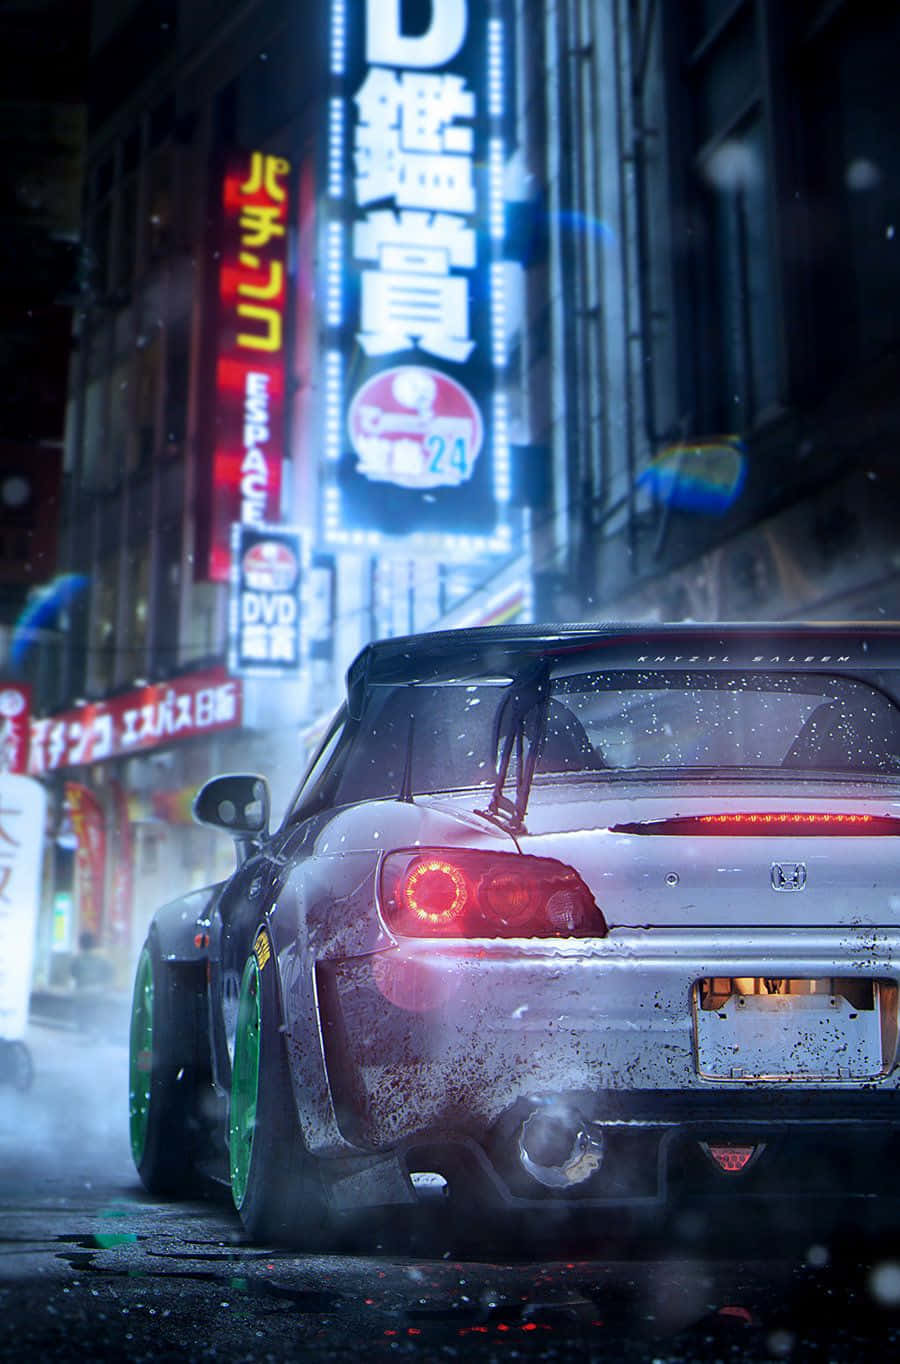 Thrilling Action with Pixel 3 - Need For Speed Background